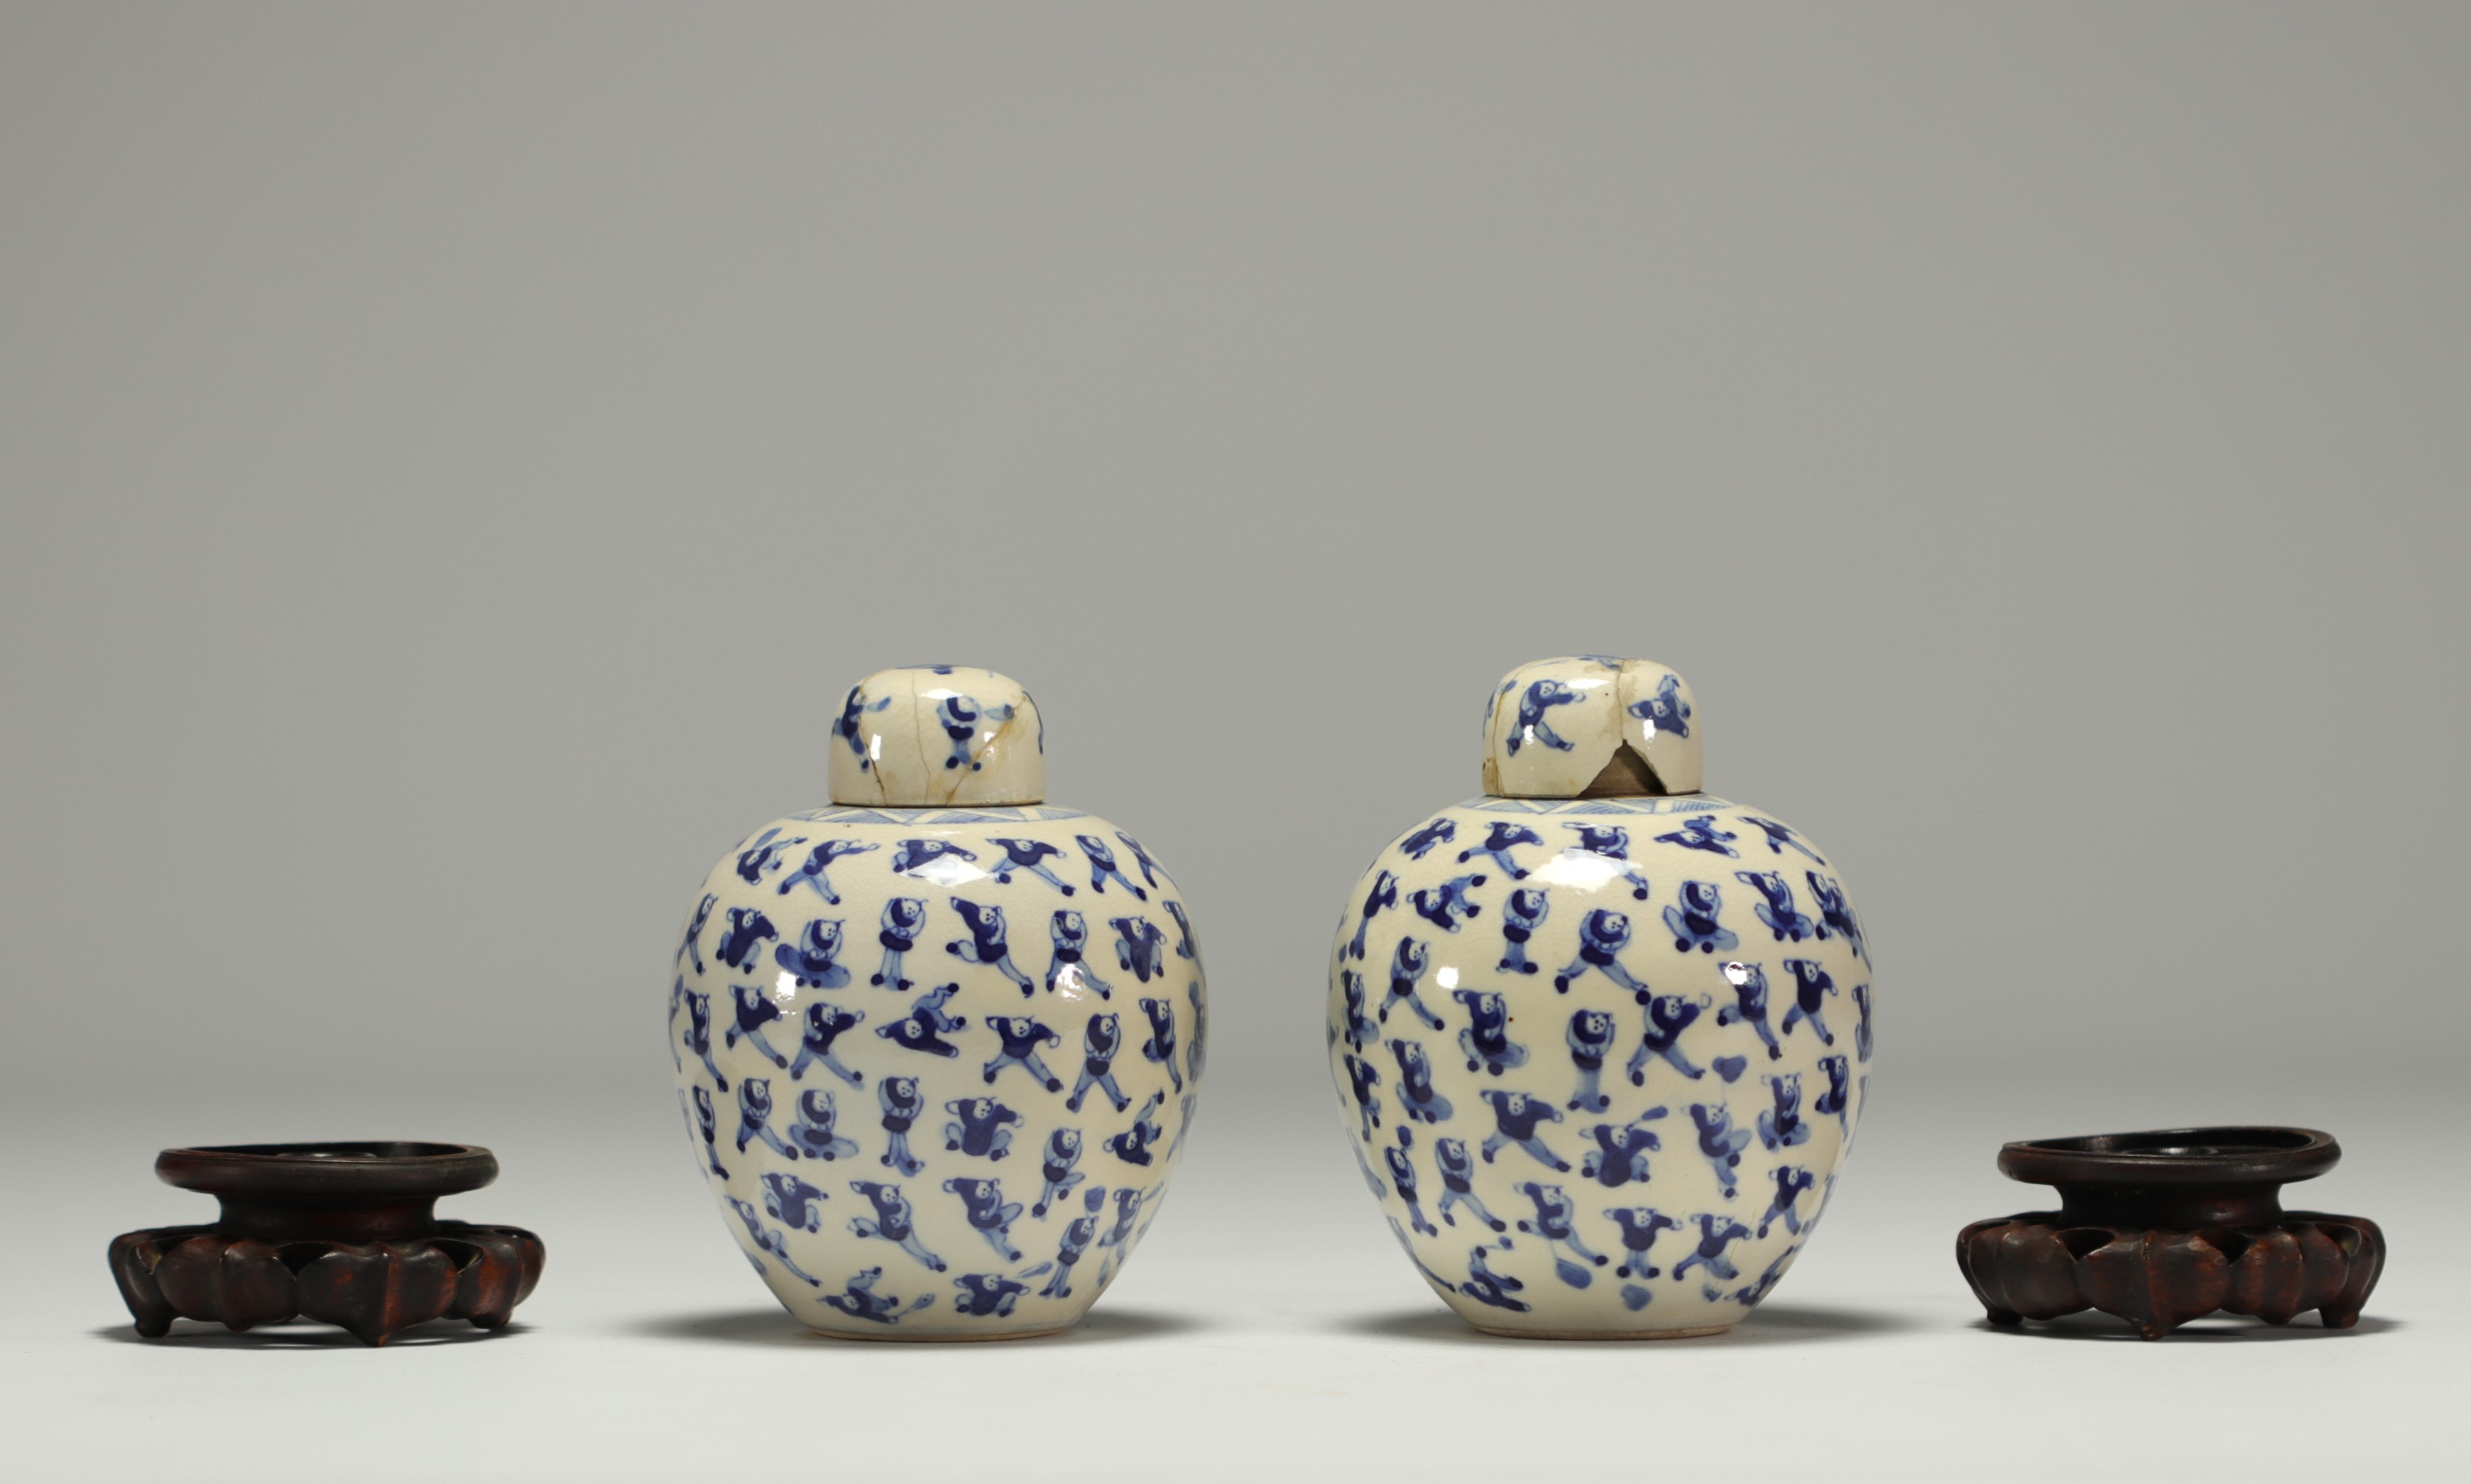 China - Pair of white-blue porcelain covered pots with children, wooden base. - Image 2 of 3